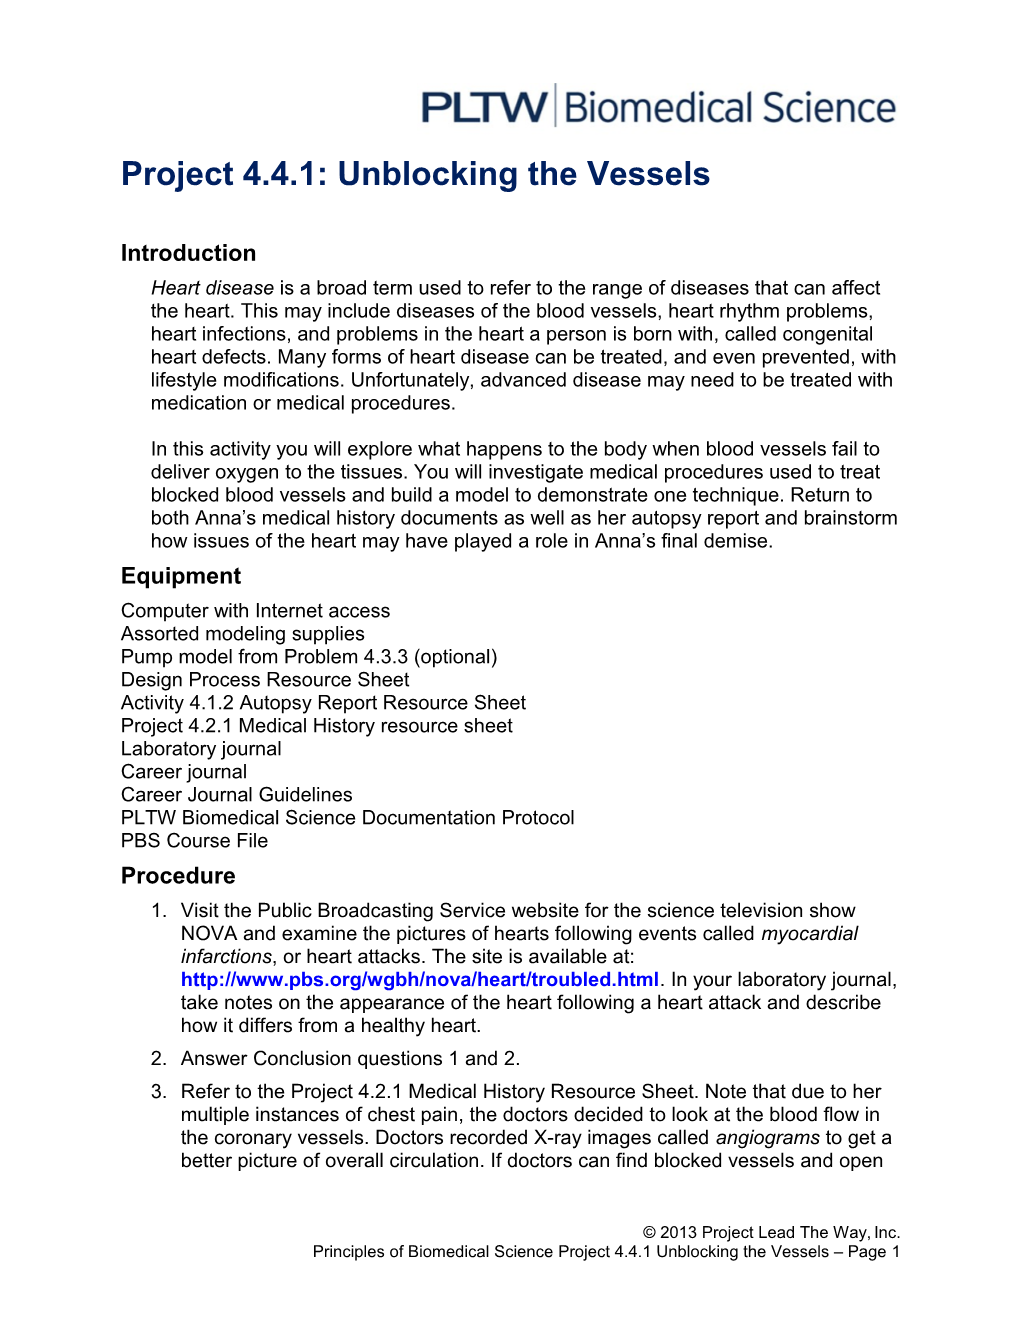 Project 4.4.1: Unblocking the Vessels